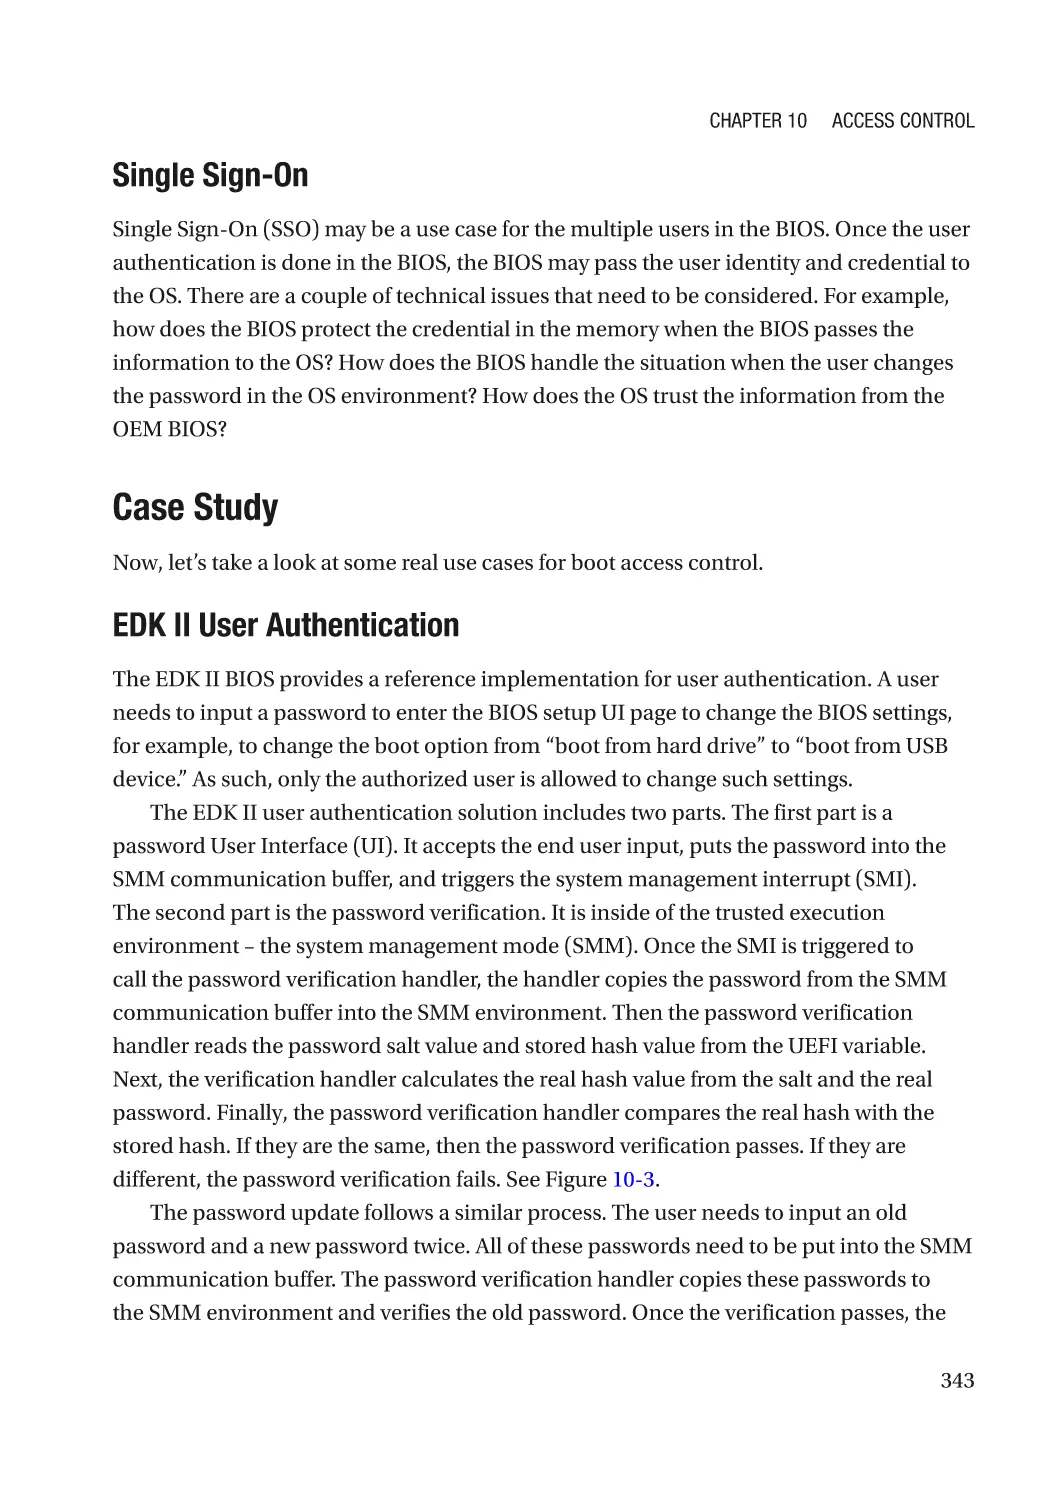 Single Sign-On
Case Study
EDK II User Authentication